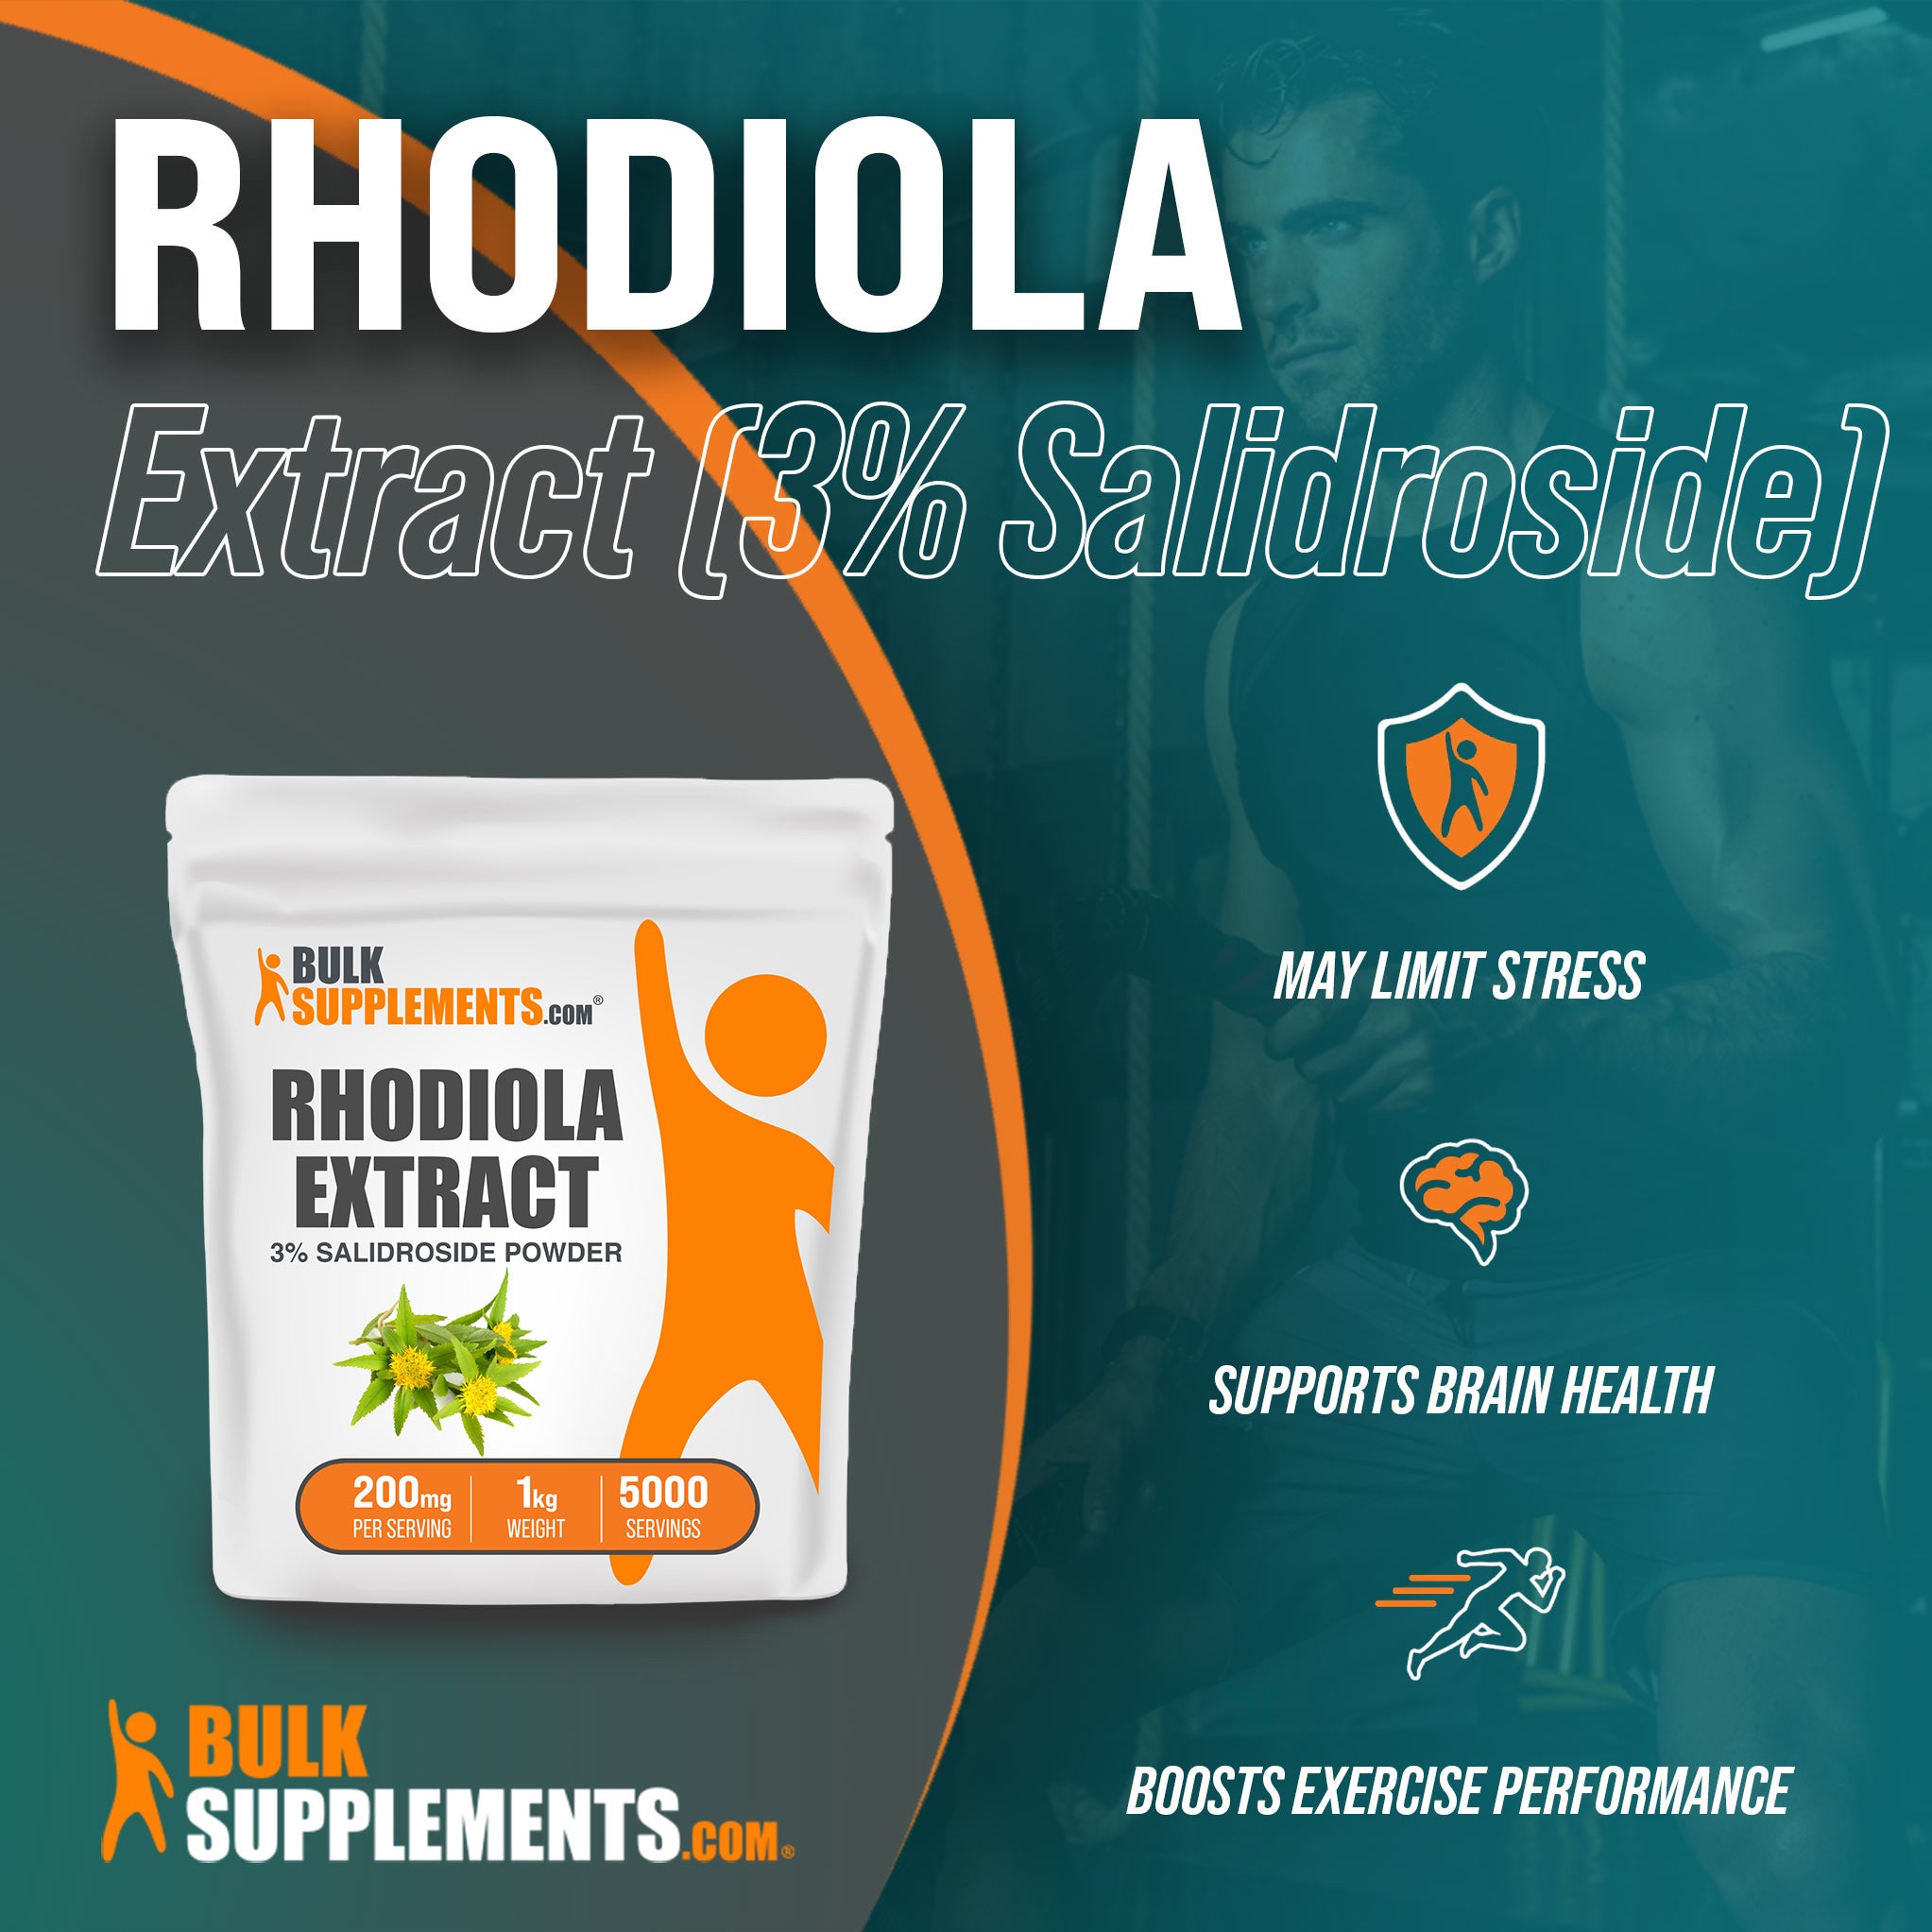 Benefits of Rhodiola Extract 3% Salidroside: may limit stress, supports brain health, boosts exercise performance